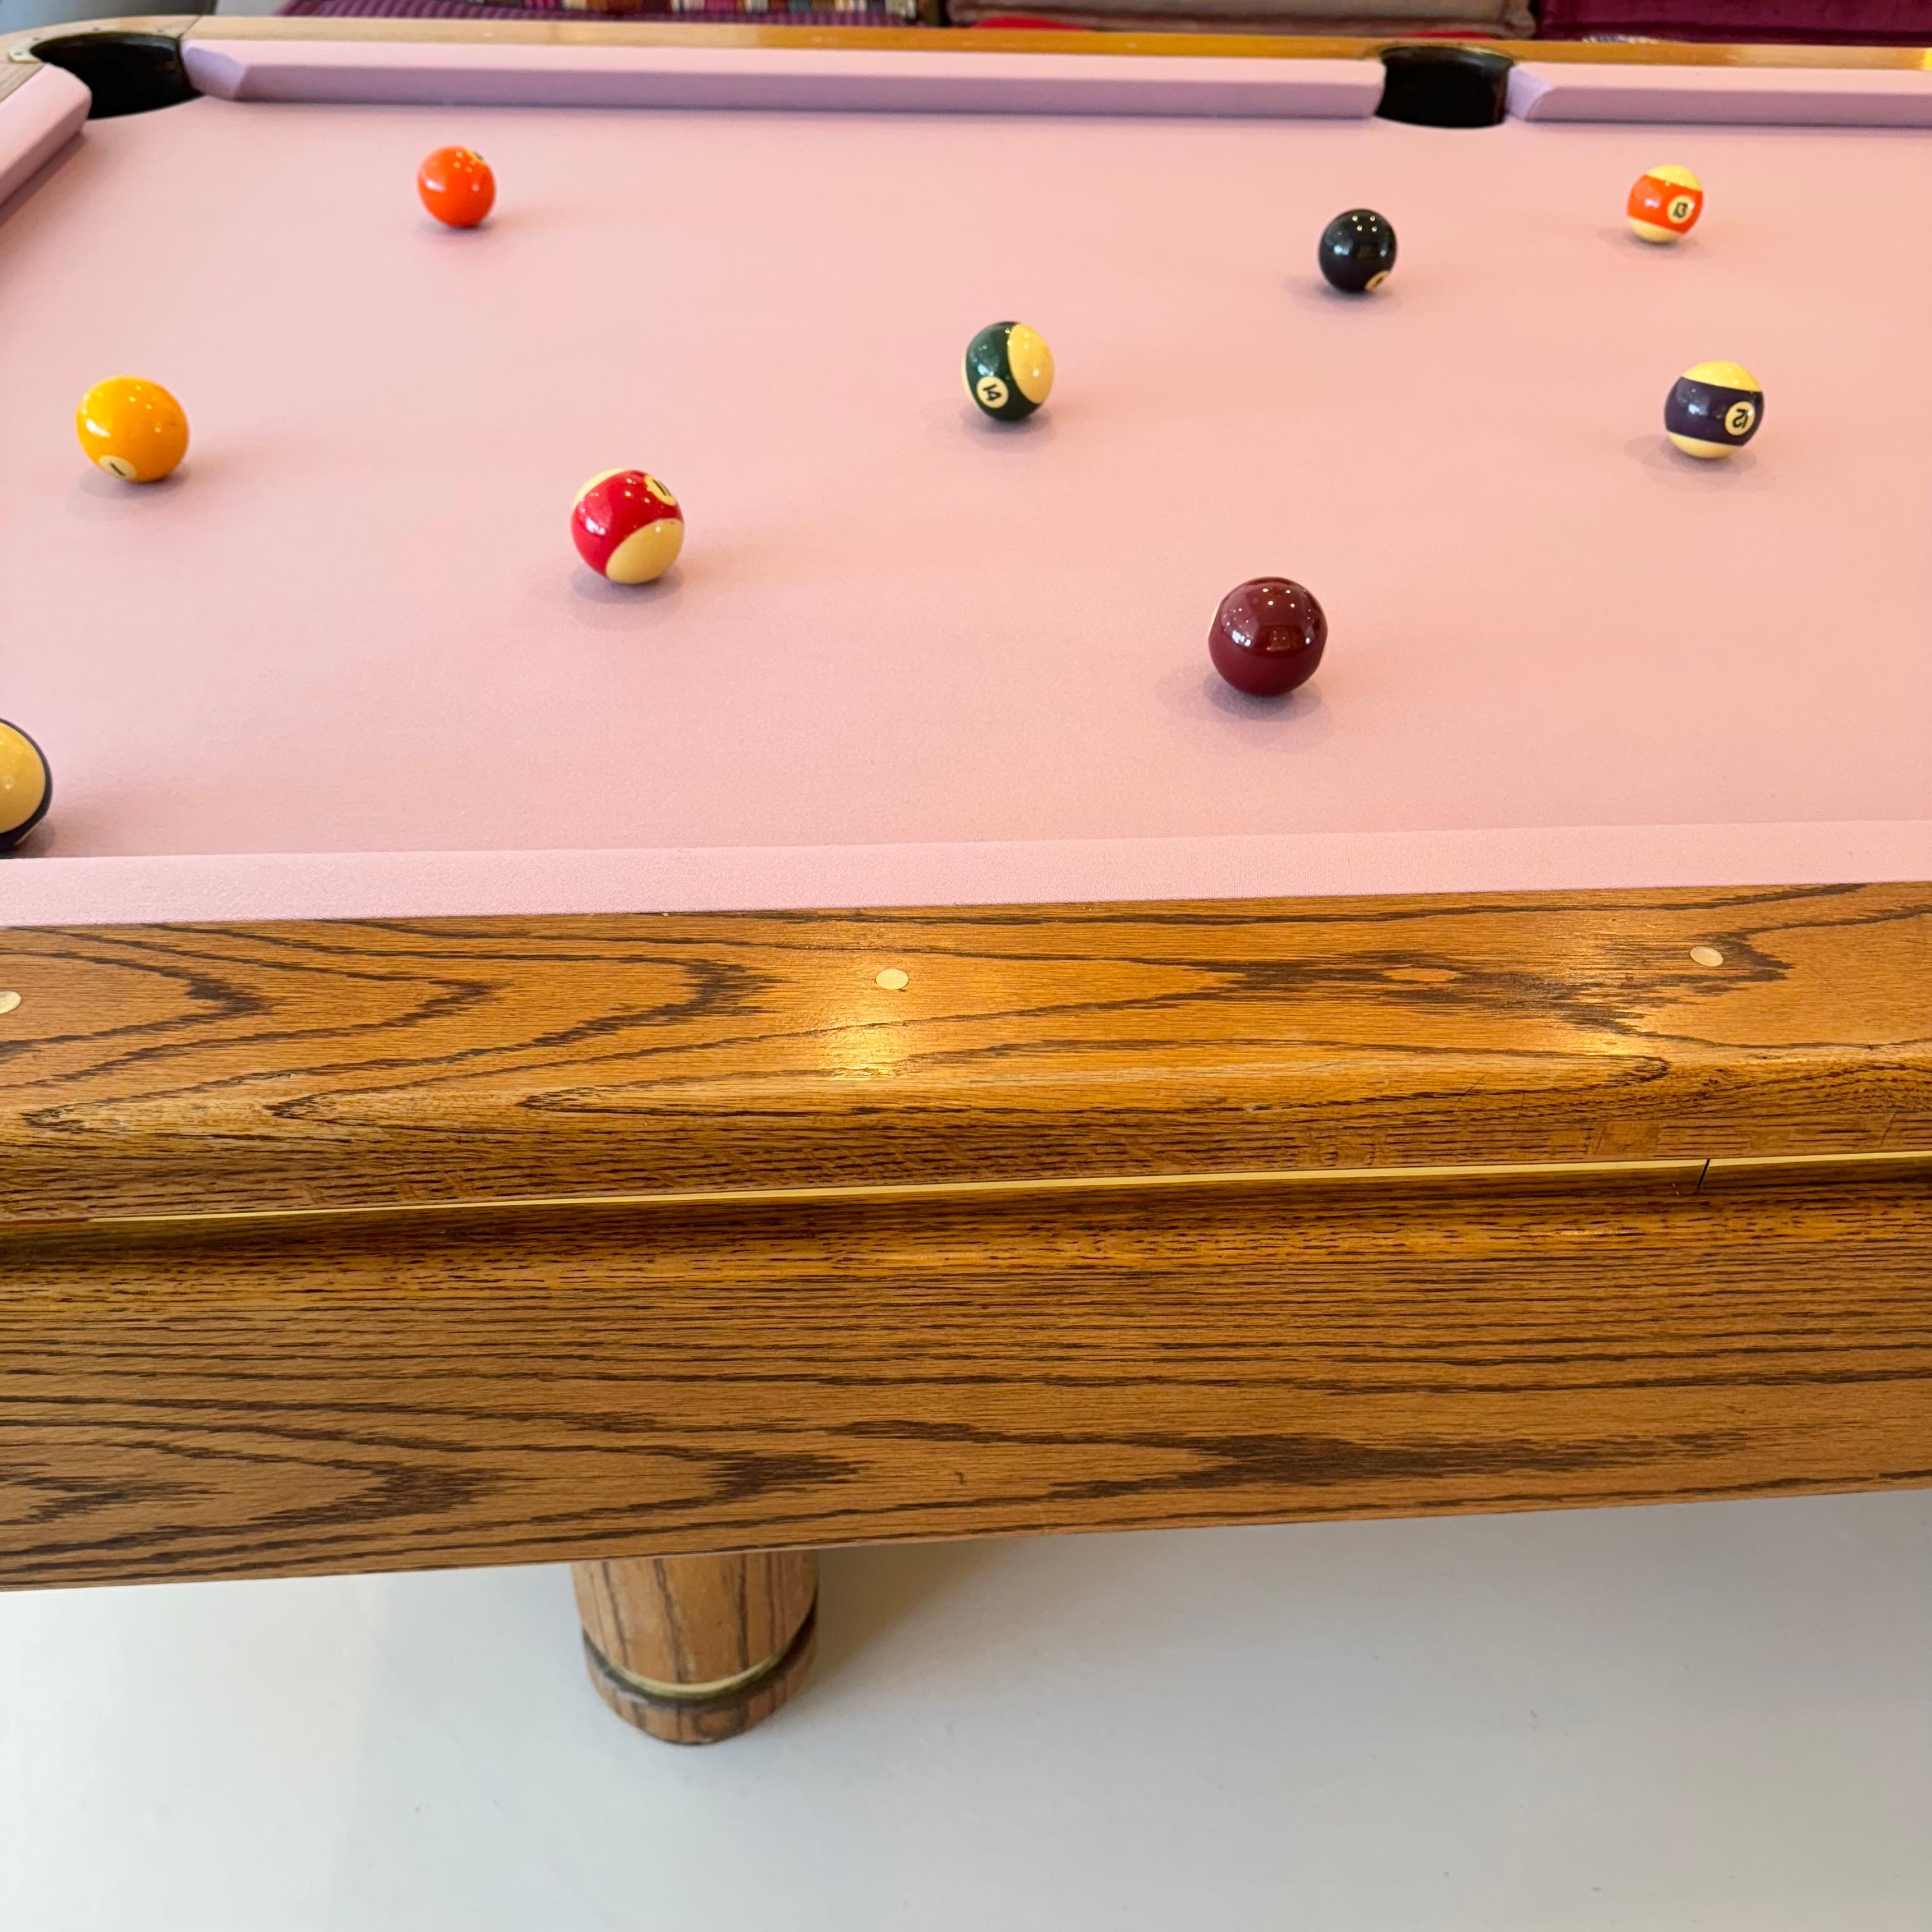 Elegant oak and brass Golden West pool table made in Canoga Park, California as part of Golden West's 